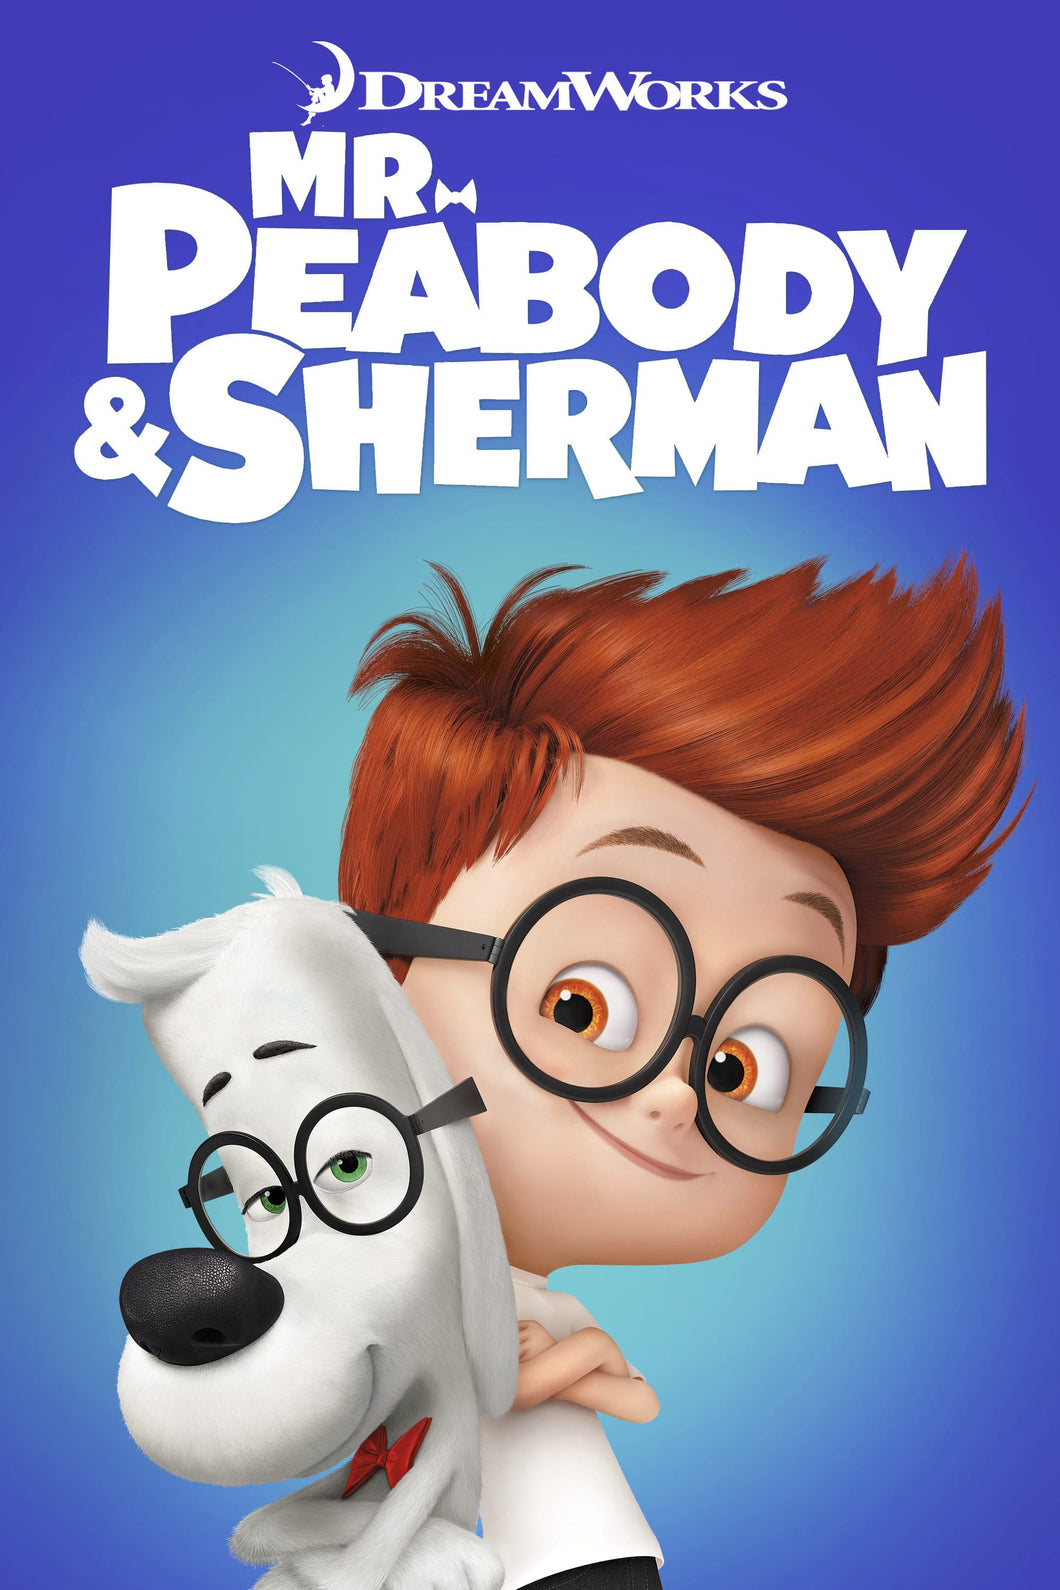 Mr. Peabody And Sherman (2014) Animated Movie Poster Framed or Unframed Glossy Poster Free UK Shipping!!!